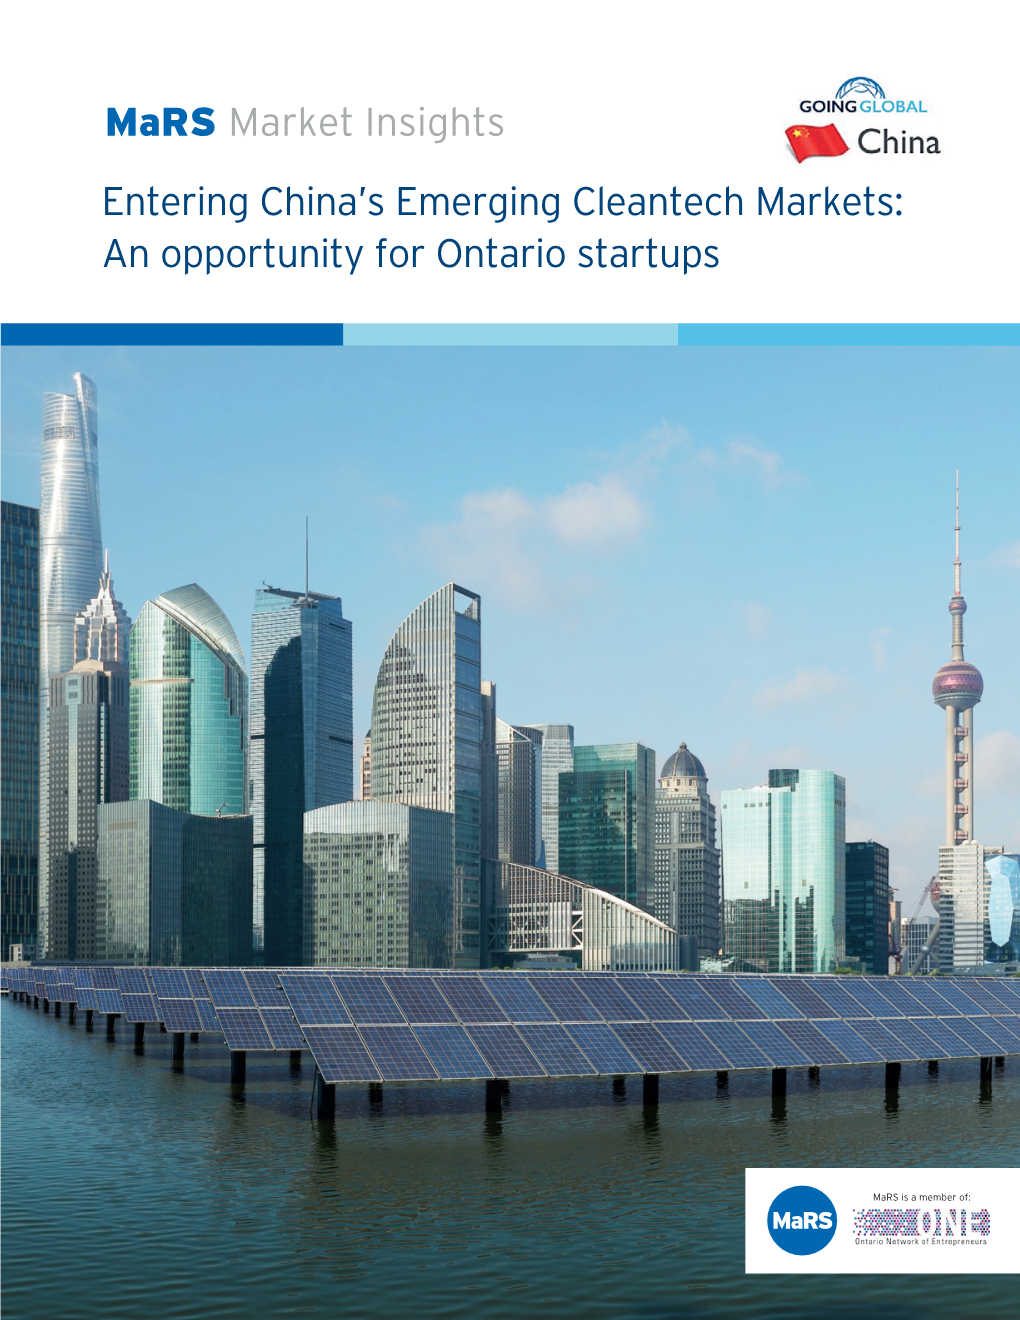 Entering China's Emerging Cleantech Markets: an Opportunity for Ontario